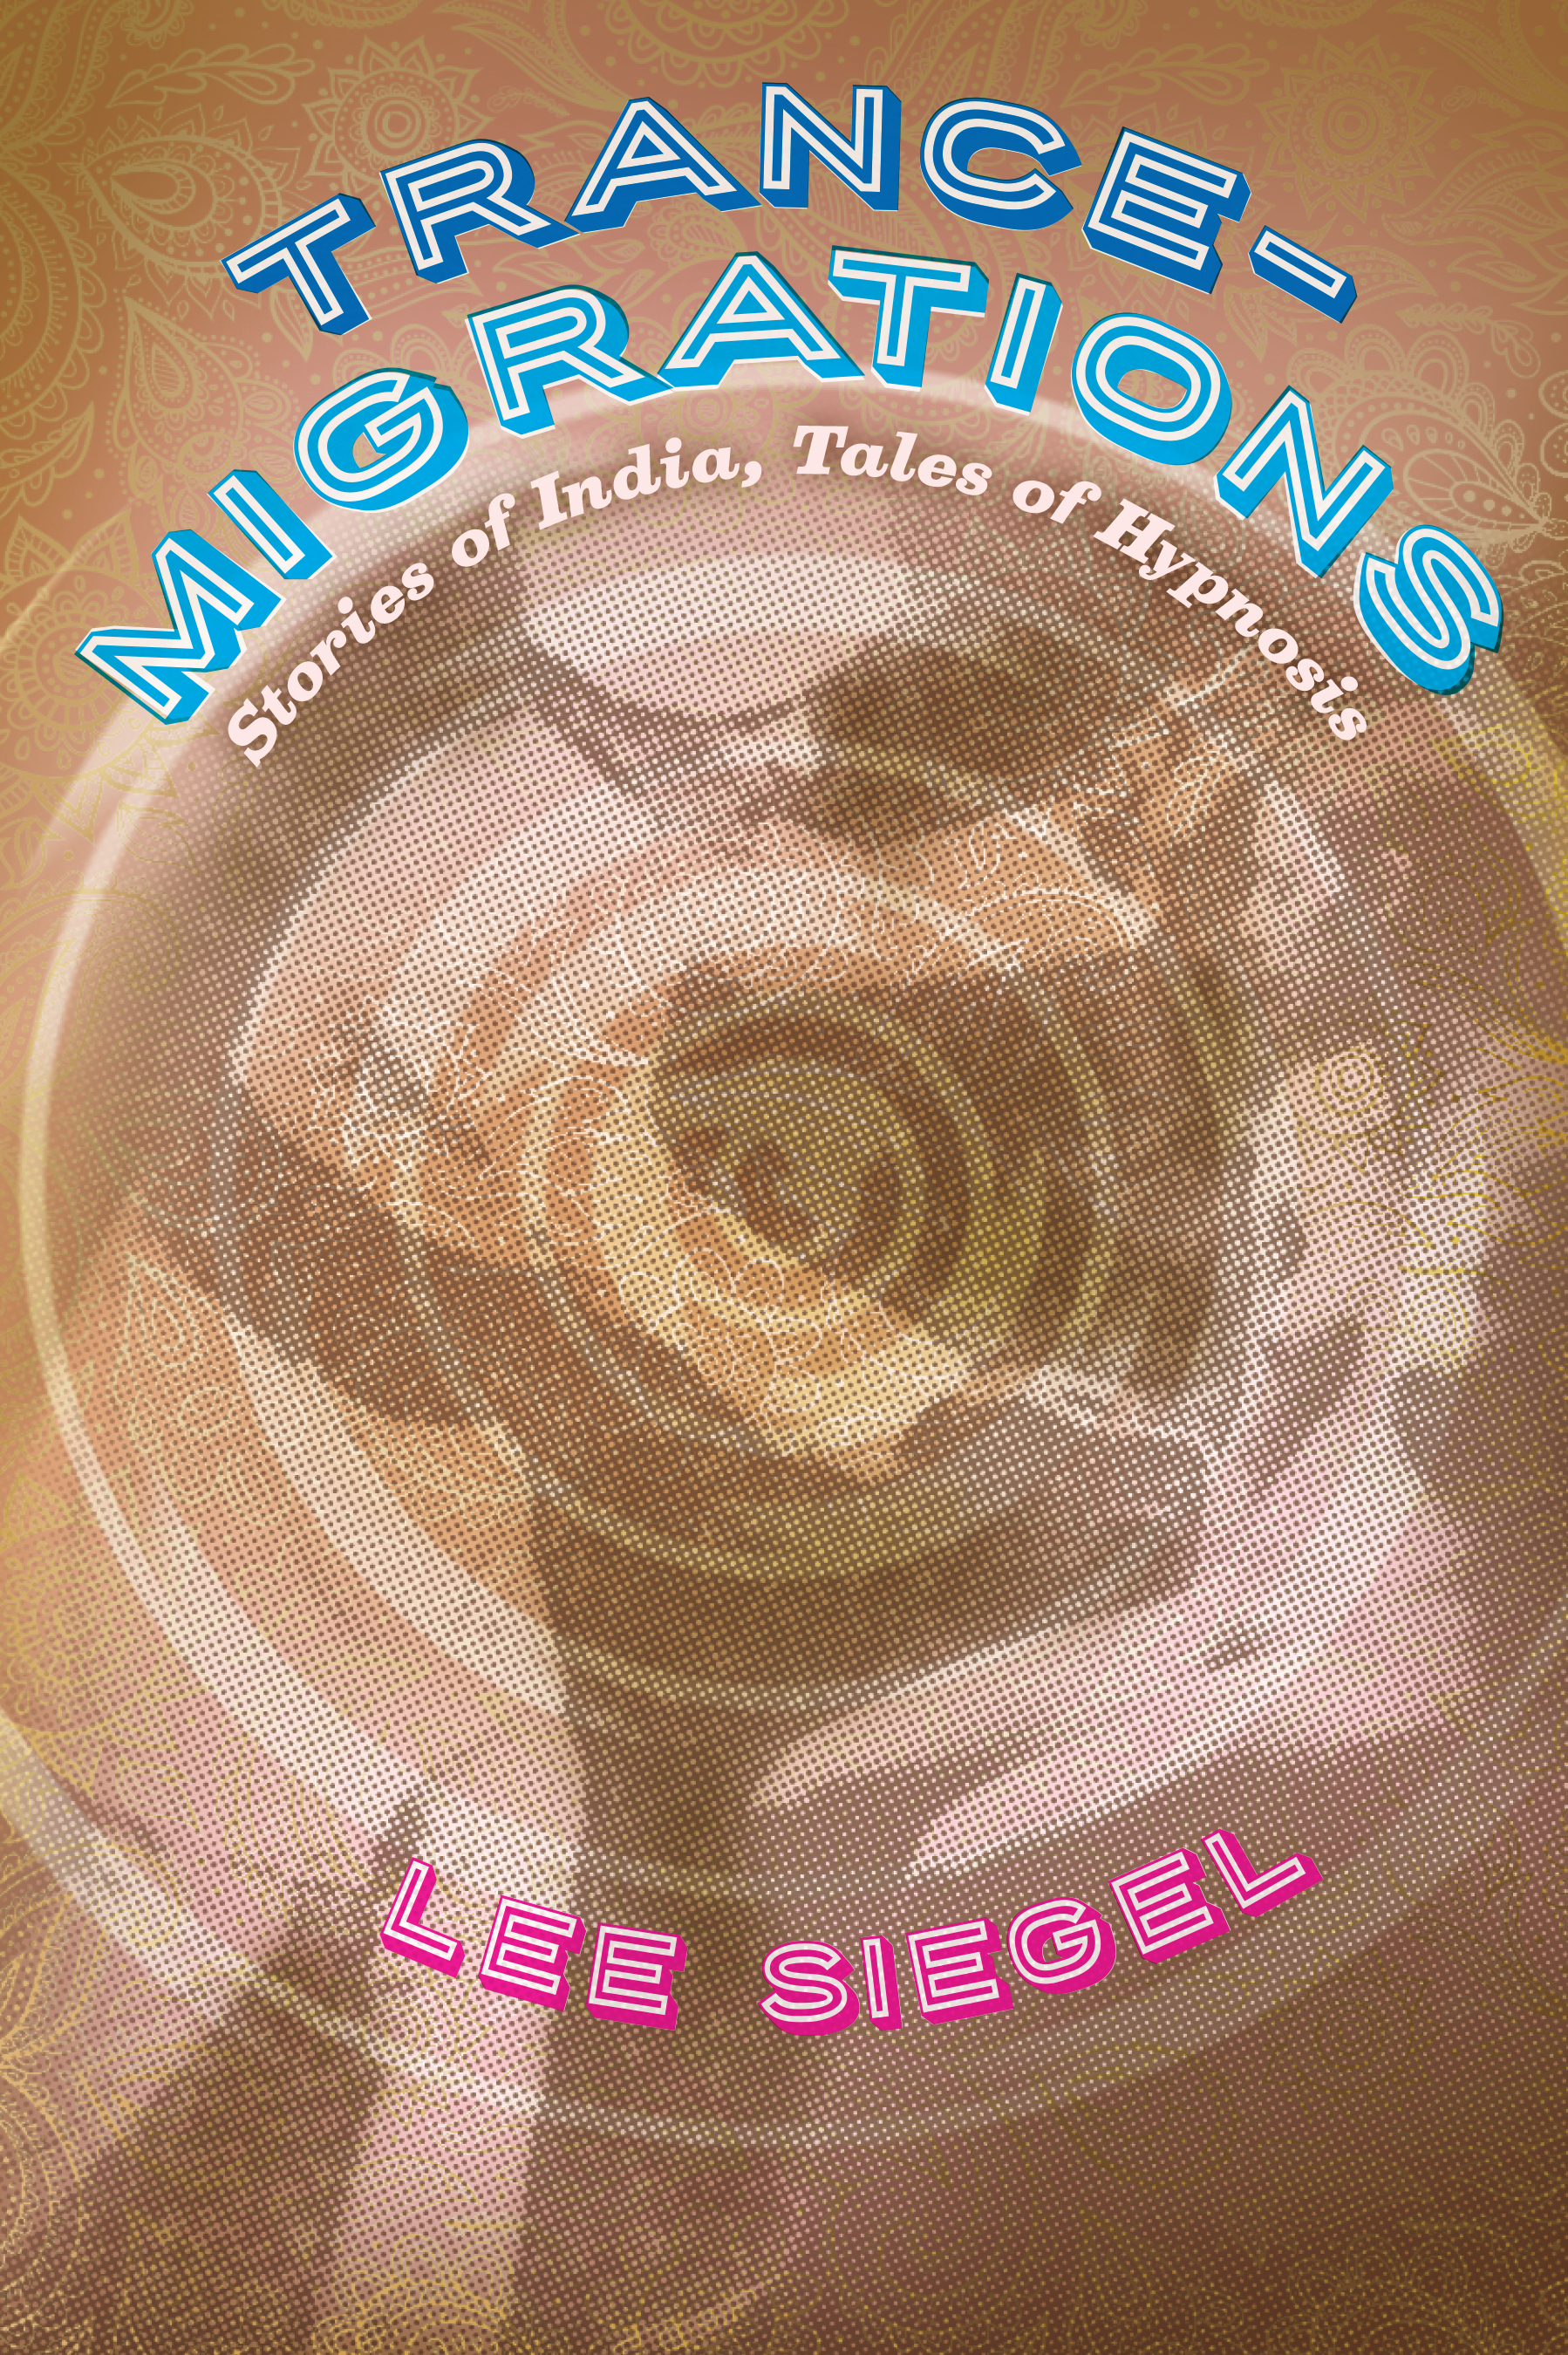 Trance-Migrations Stories of India, Tales of Hypnosis, Siegel